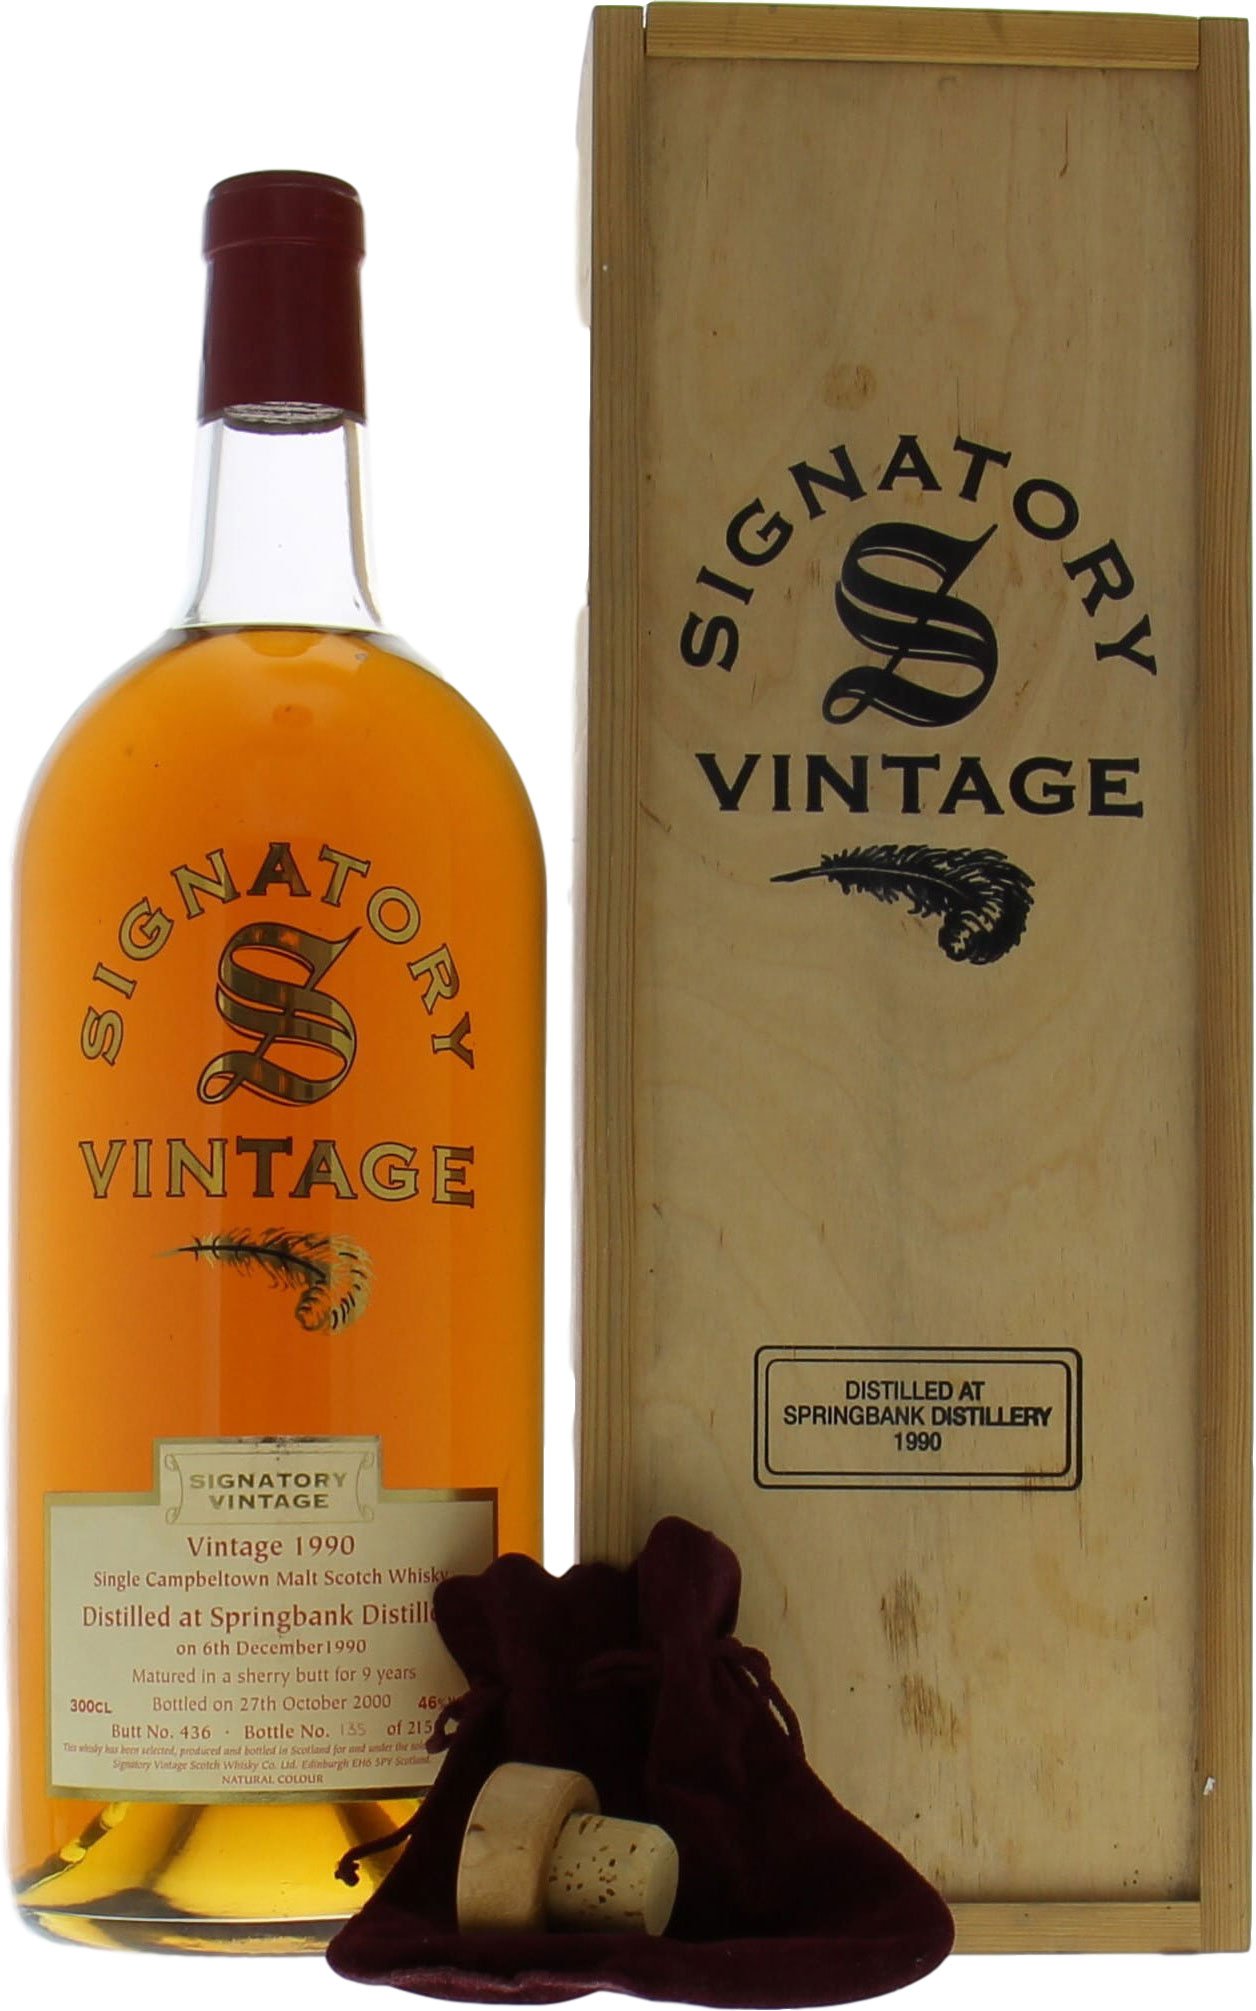 Springbank - 10 Years Old Signatory Vintage Cask:437 46% 1990 Perfect